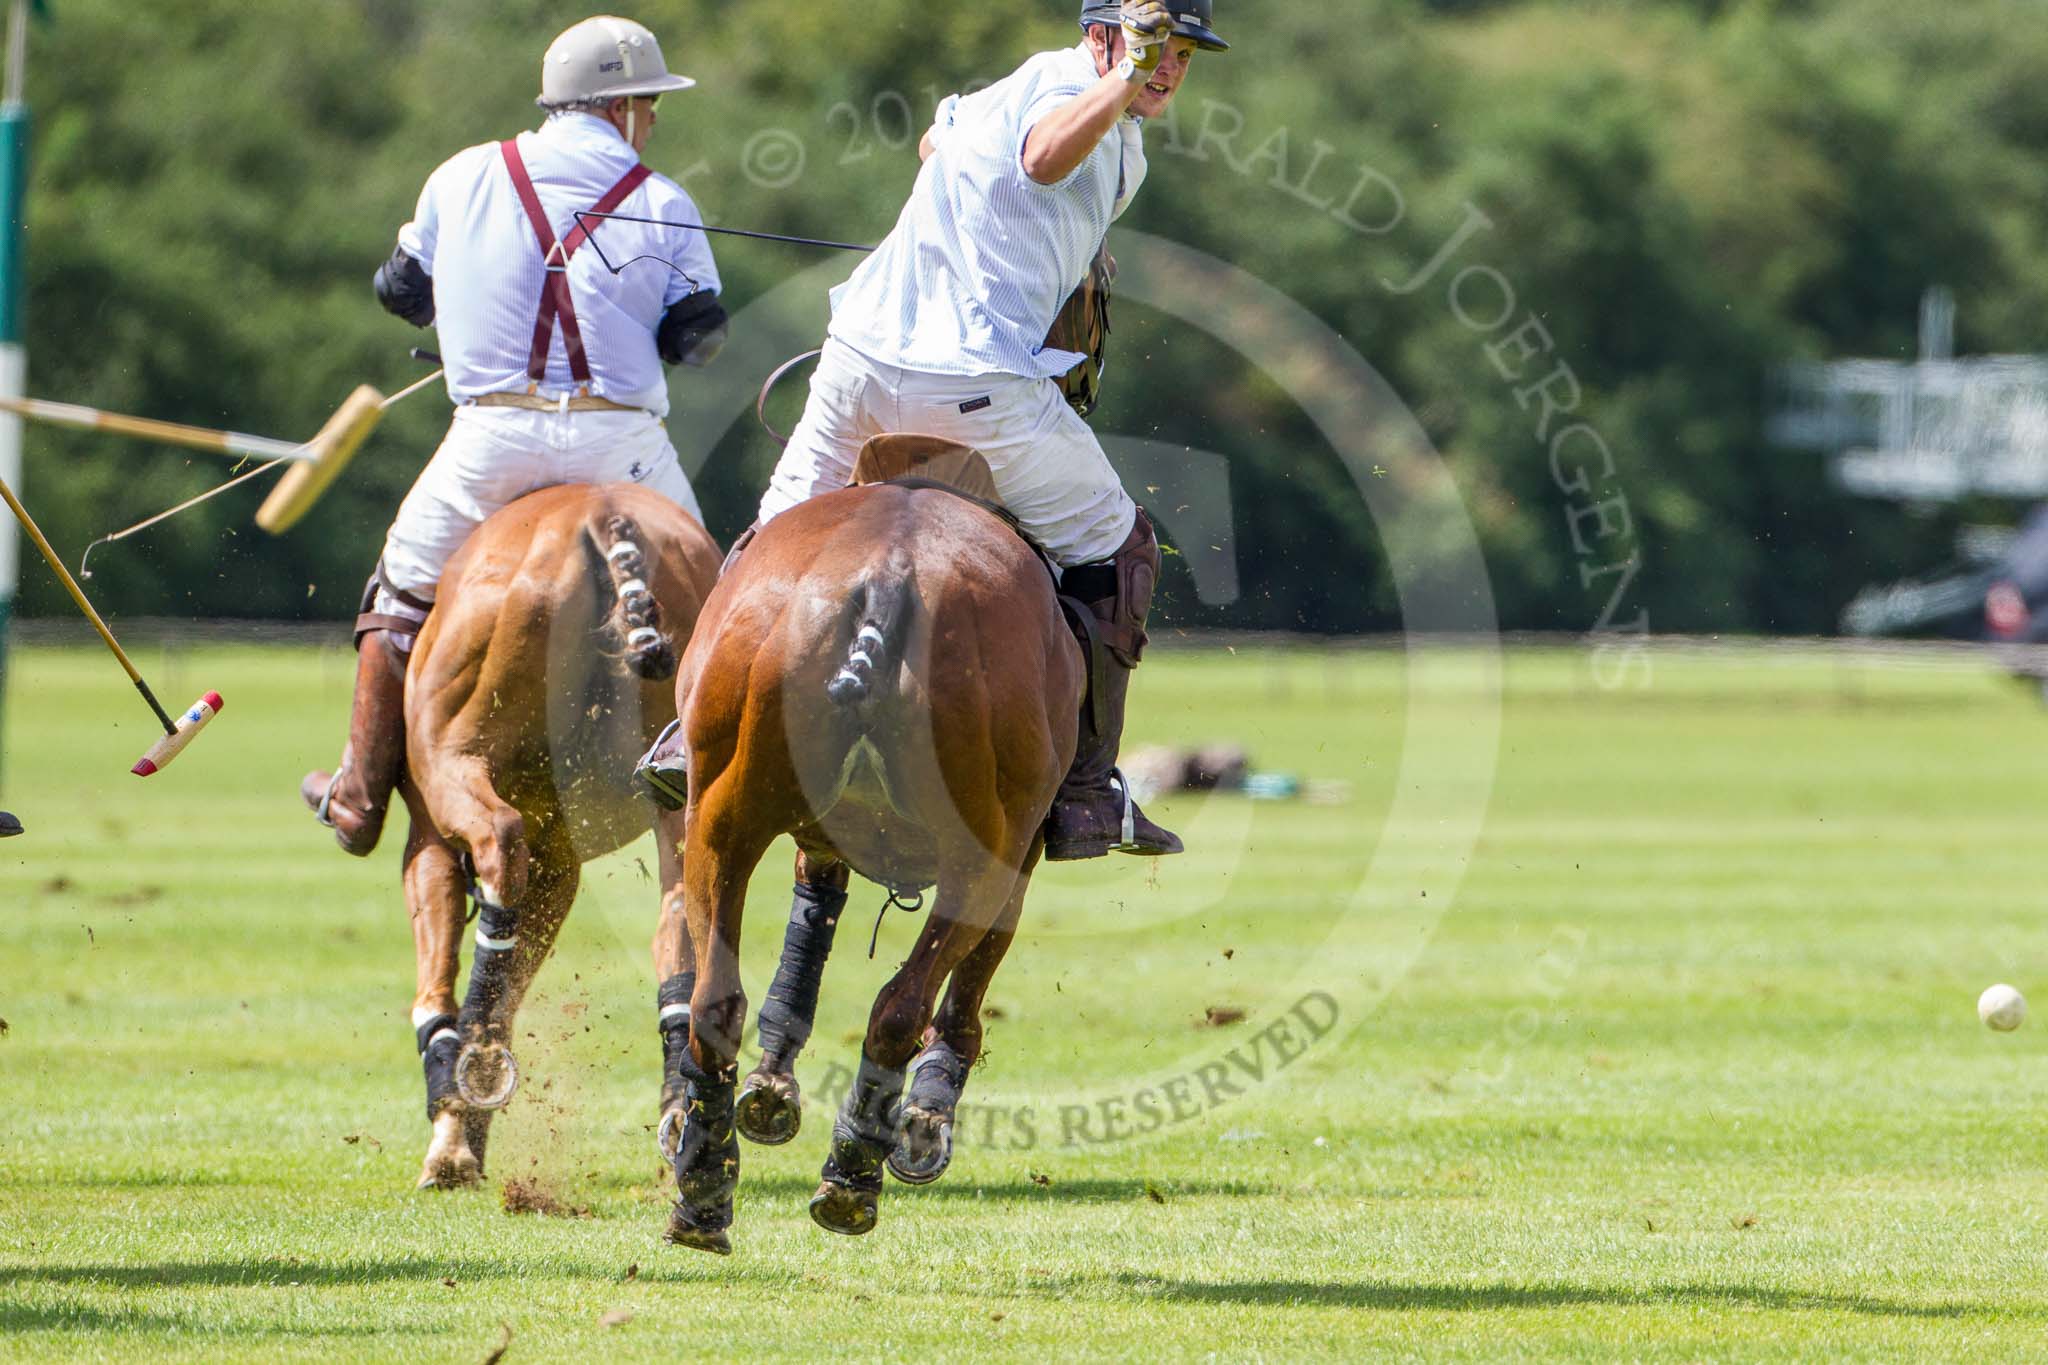 7th Heritage Polo Cup finals.
Hurtwood Park Polo Club,
Ewhurst Green,
Surrey,
United Kingdom,
on 05 August 2012 at 14:11, image #69